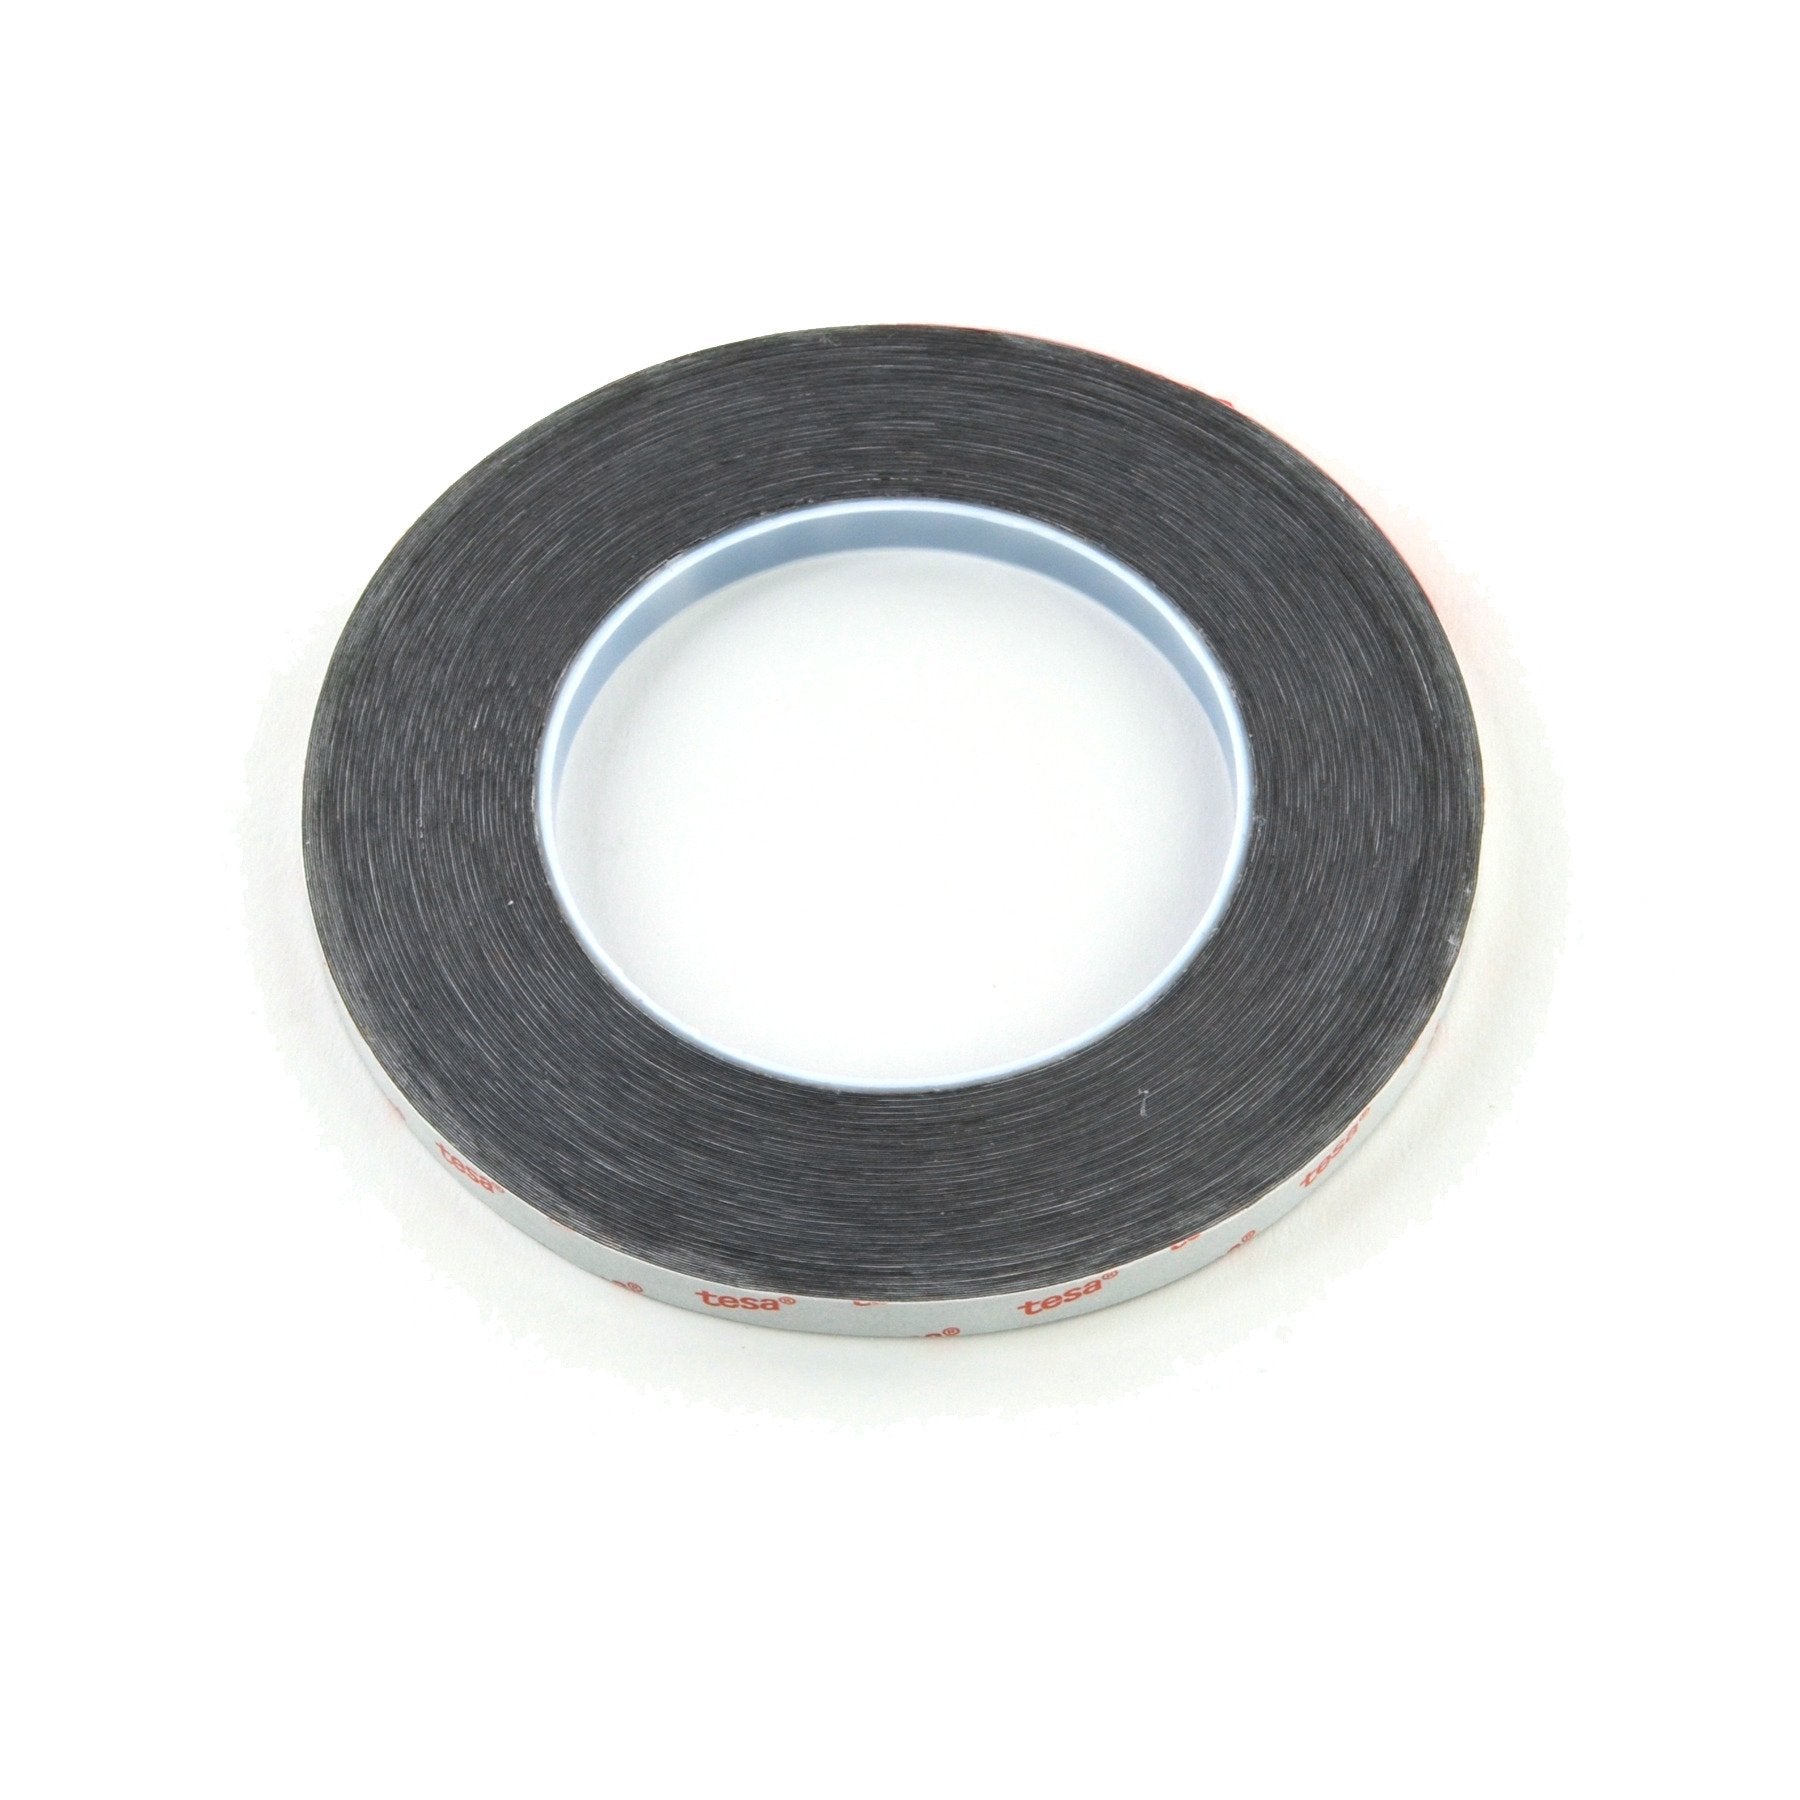 Tesa 61395 Tape New 8 mm Wide Double-Sided Roll